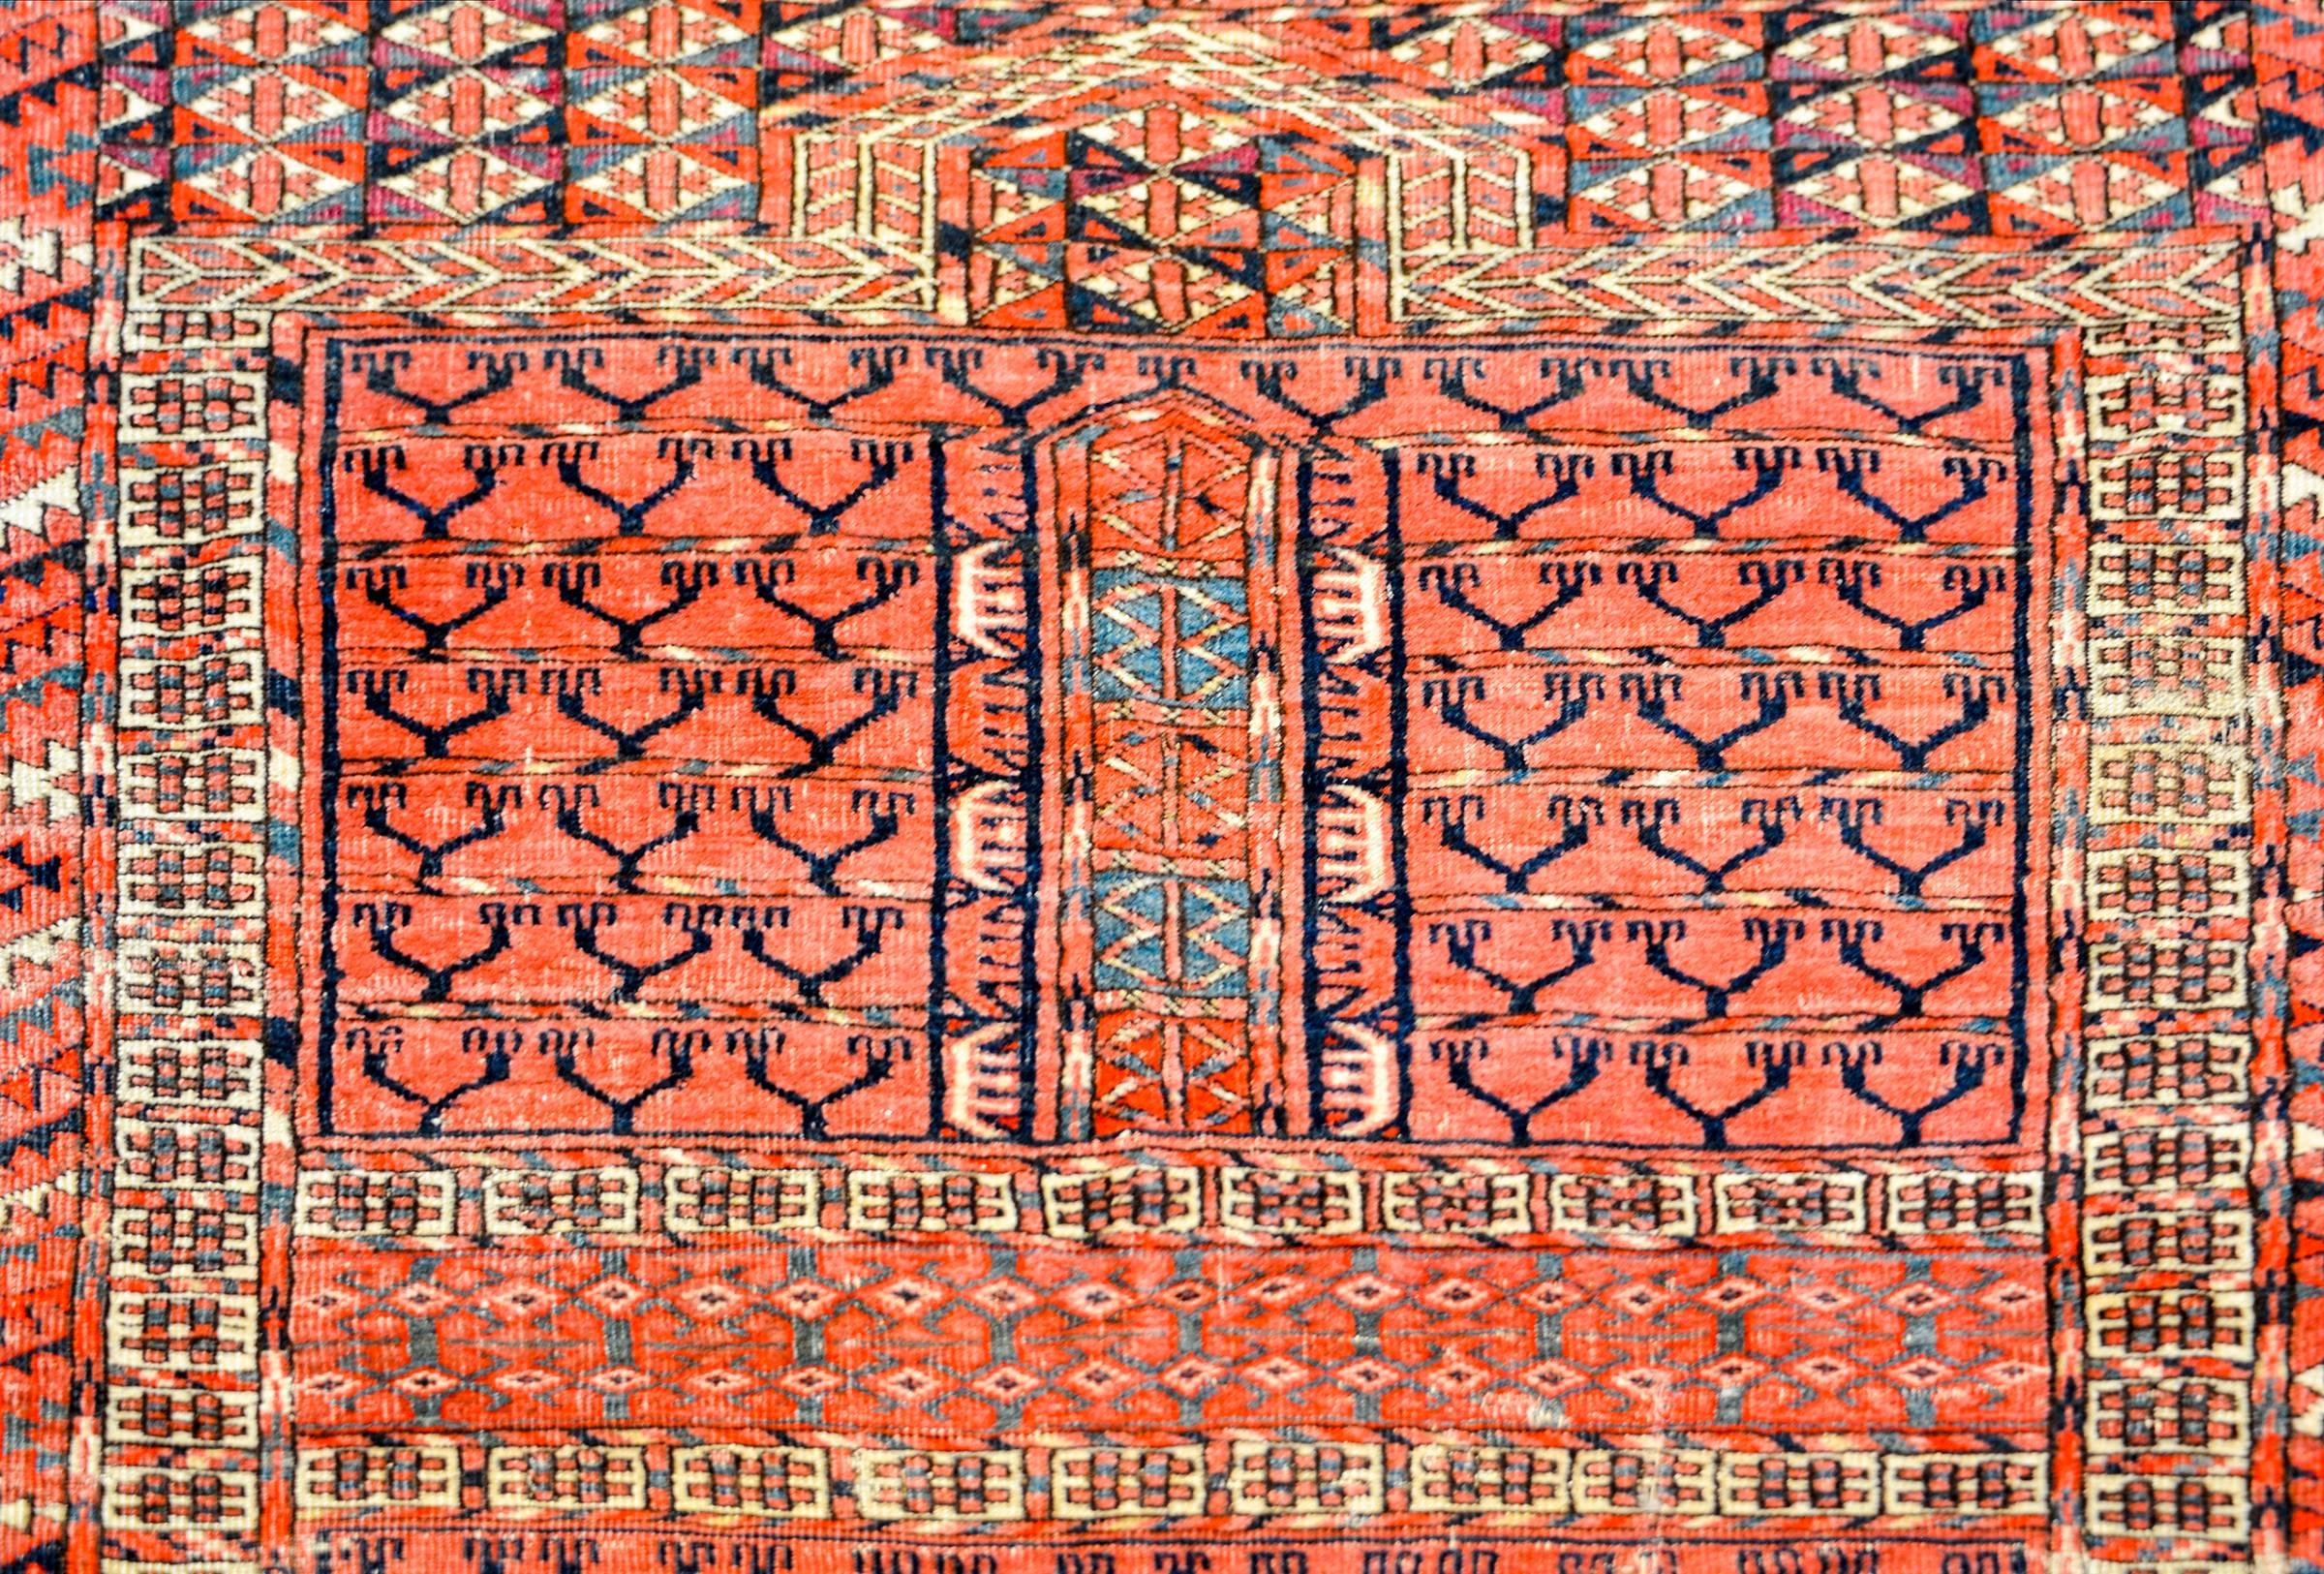 A 19th century Persian Turkmen prayer rug with a beautiful elaborate geometric pattern in alternating colors of crimson, indigo, coral, and cream, surrounded by a multiple elaborate complementary borders.